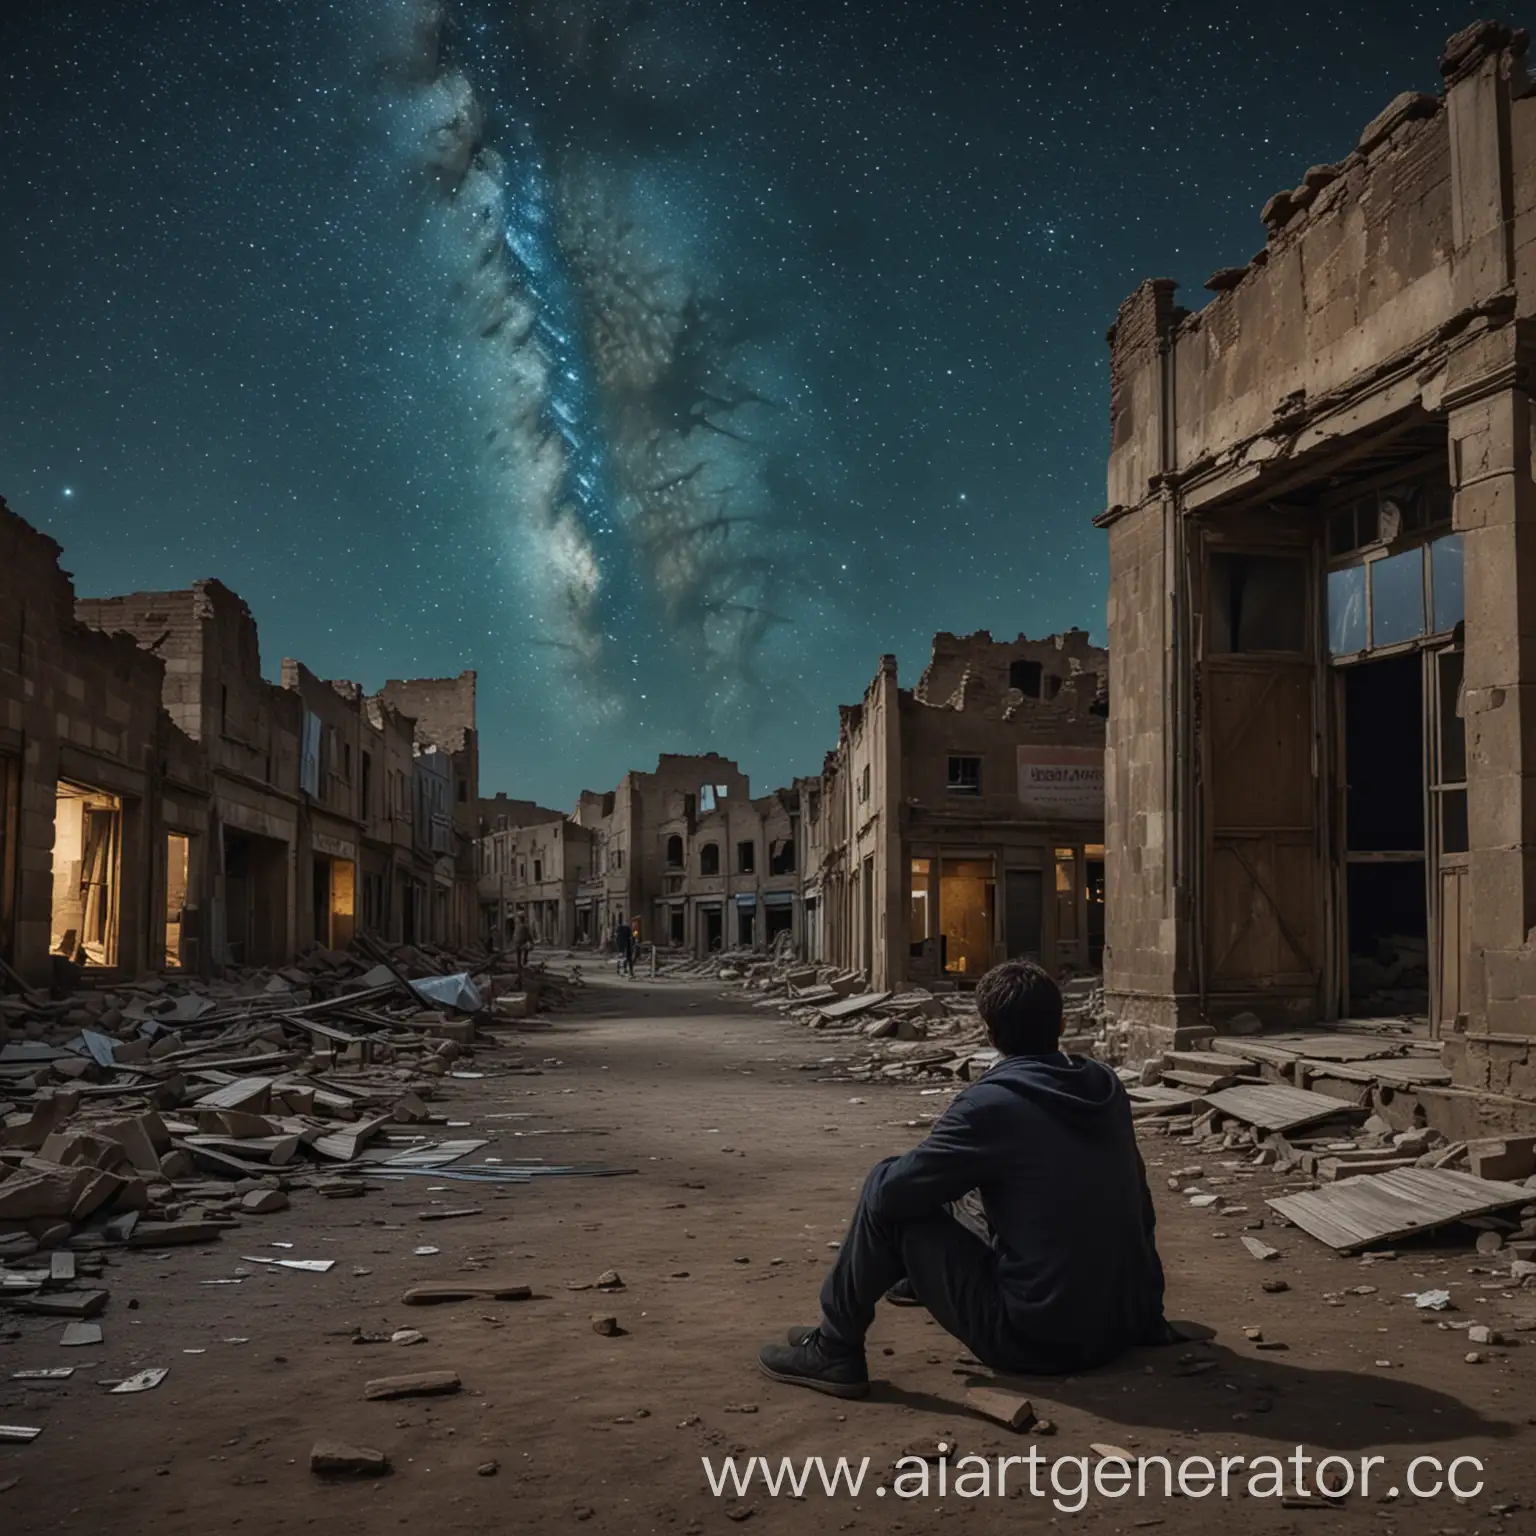 A ruined city in the distance, a person sits near a shop, the starry night sky.